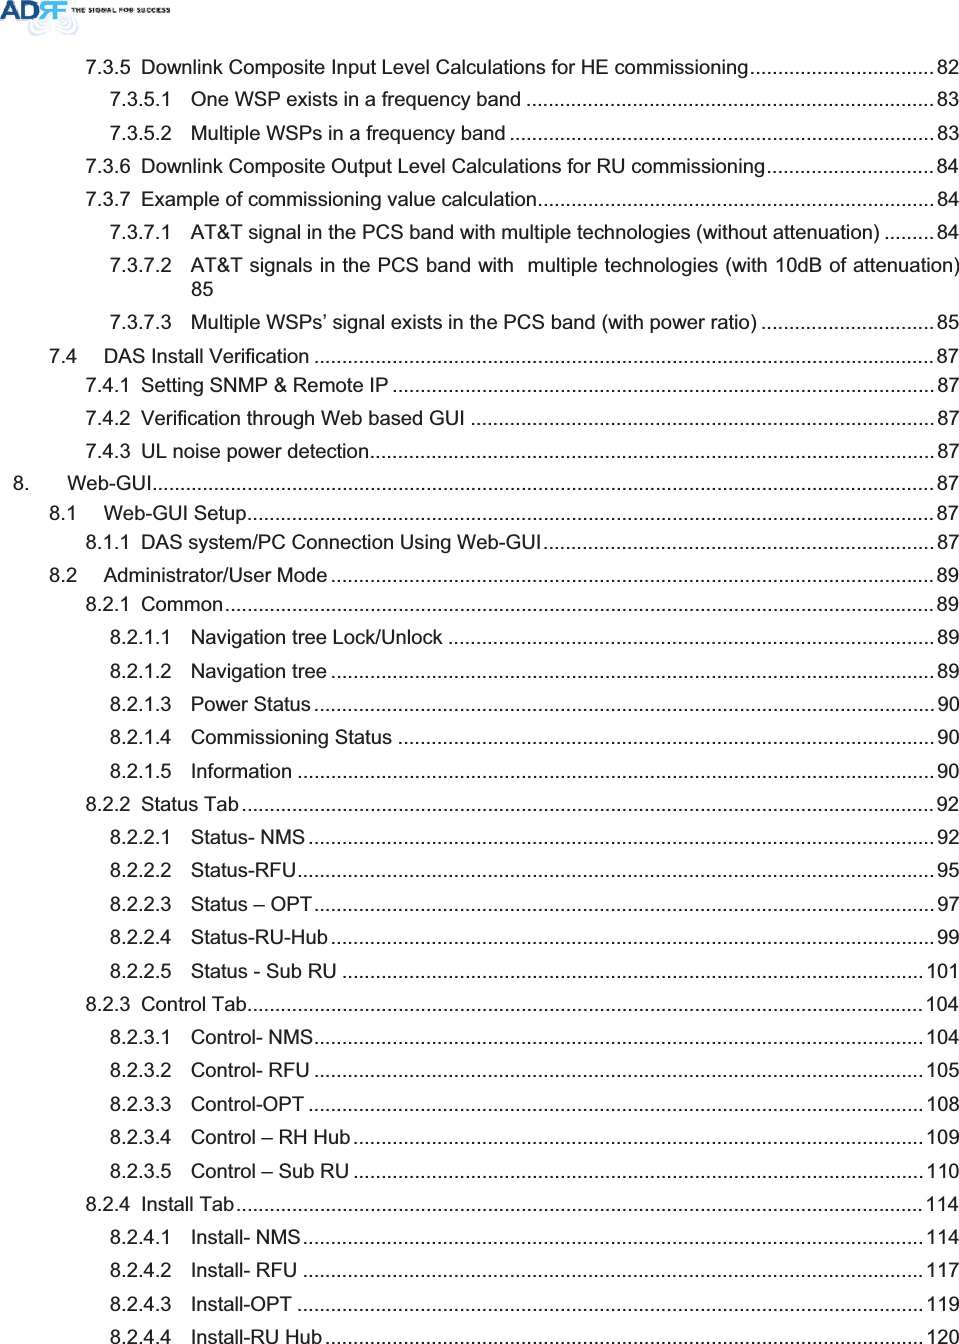 7.3.5 Downlink Composite Input Level Calculations for HE commissioning.................................827.3.5.1 One WSP exists in a frequency band .........................................................................837.3.5.2 Multiple WSPs in a frequency band ............................................................................837.3.6 Downlink Composite Output Level Calculations for RU commissioning..............................847.3.7 Example of commissioning value calculation.......................................................................847.3.7.1 AT&amp;T signal in the PCS band with multiple technologies (without attenuation) .........847.3.7.2 AT&amp;T signals in the PCS band with  multiple technologies (with 10dB of attenuation) 857.3.7.3 Multiple WSPs’ signal exists in the PCS band (with power ratio) ...............................857.4 DAS Install Verification ............................................................................................................... 877.4.1 Setting SNMP &amp; Remote IP .................................................................................................877.4.2 Verification through Web based GUI ...................................................................................877.4.3 UL noise power detection.....................................................................................................878. Web-GUI............................................................................................................................................878.1 Web-GUI Setup........................................................................................................................... 878.1.1 DAS system/PC Connection Using Web-GUI......................................................................878.2 Administrator/User Mode ............................................................................................................898.2.1 Common...............................................................................................................................898.2.1.1 Navigation tree Lock/Unlock .......................................................................................898.2.1.2 Navigation tree ............................................................................................................898.2.1.3 Power Status ...............................................................................................................908.2.1.4 Commissioning Status ................................................................................................908.2.1.5 Information ..................................................................................................................908.2.2 Status Tab ............................................................................................................................928.2.2.1 Status- NMS ................................................................................................................ 928.2.2.2 Status-RFU..................................................................................................................958.2.2.3 Status – OPT...............................................................................................................978.2.2.4 Status-RU-Hub ............................................................................................................998.2.2.5 Status - Sub RU ........................................................................................................1018.2.3 Control Tab.........................................................................................................................1048.2.3.1 Control- NMS.............................................................................................................1048.2.3.2 Control- RFU .............................................................................................................1058.2.3.3 Control-OPT ..............................................................................................................1088.2.3.4 Control – RH Hub......................................................................................................1098.2.3.5 Control – Sub RU ......................................................................................................1108.2.4 Install Tab...........................................................................................................................1148.2.4.1 Install- NMS...............................................................................................................1148.2.4.2 Install- RFU ...............................................................................................................1178.2.4.3 Install-OPT ................................................................................................................1198.2.4.4 Install-RU Hub ...........................................................................................................120